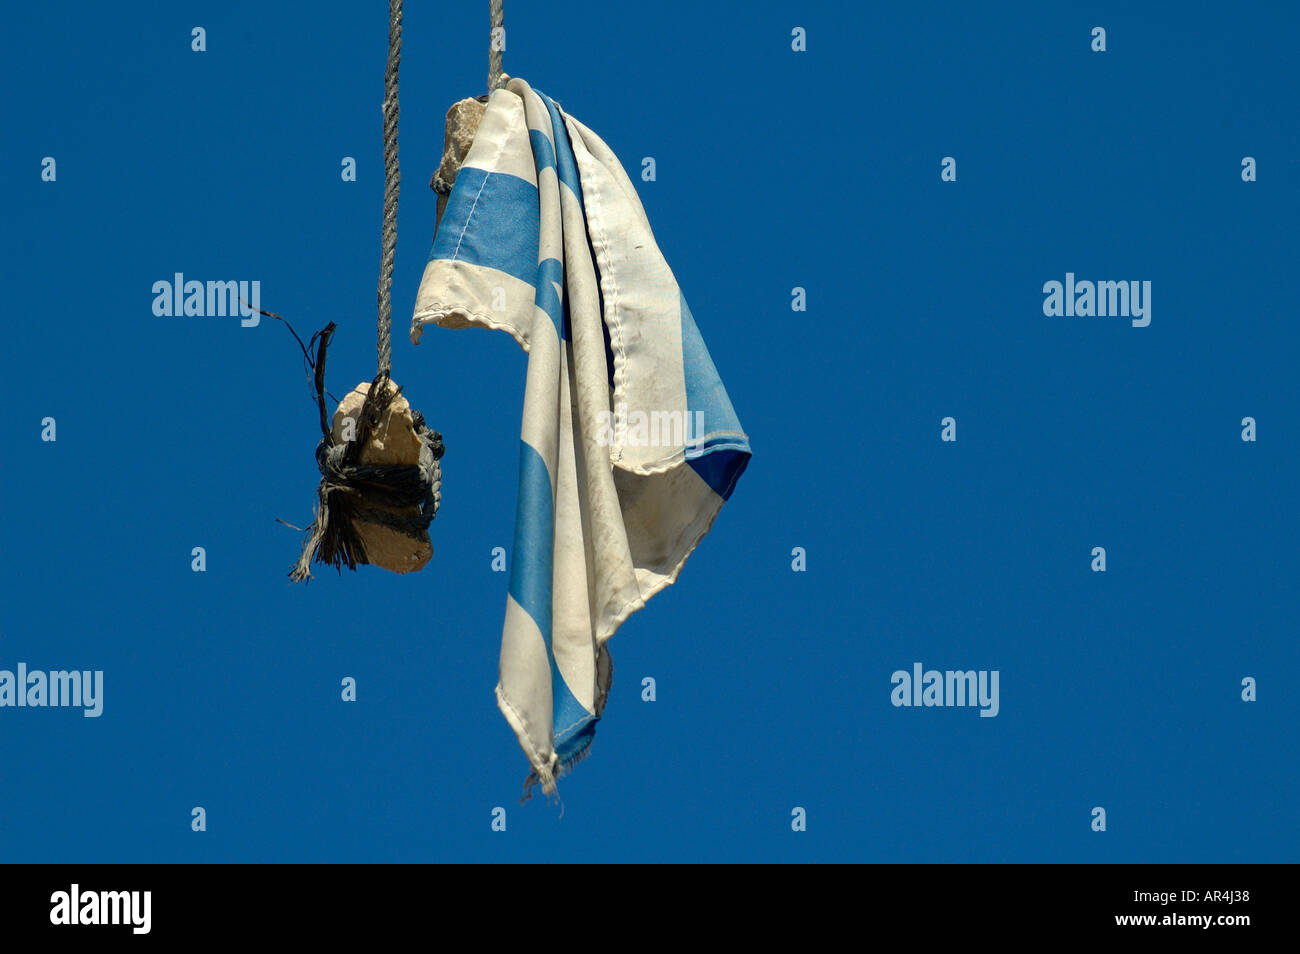 Israeli flag attached to piece of rock hanging off electric cable in East Jerusalem during Intifada riots. Israel Stock Photo